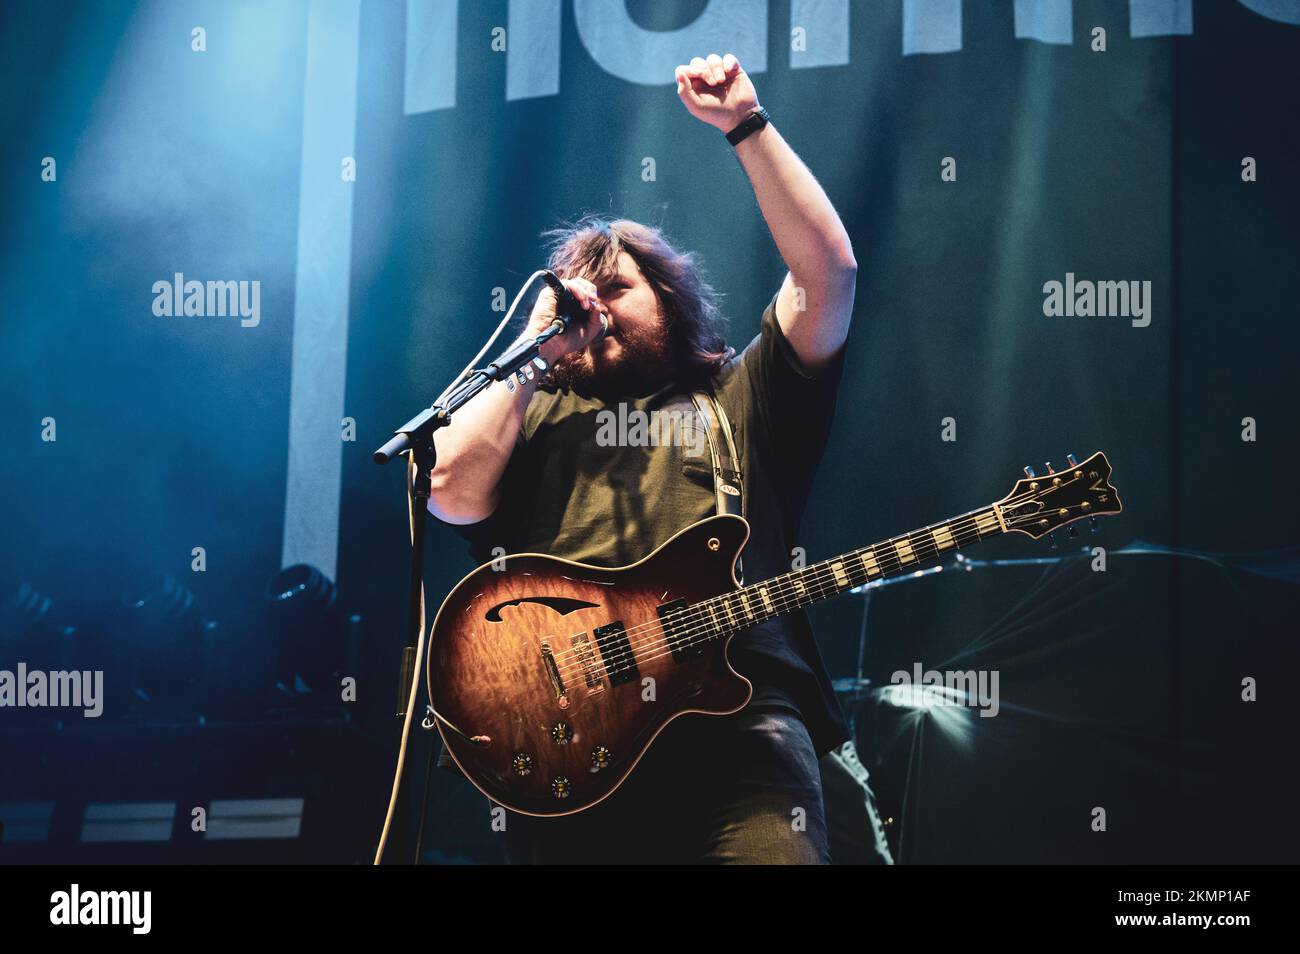 ITALY, MILAN, NOVEMBER 25TH 2022: The American musician, singer and composer Wolfgang Van Halen (better known as Mammoth WVH), performing live on stage in Milan, opening for the Alter Bridge “Pawns & Kings” European tour. Stock Photo